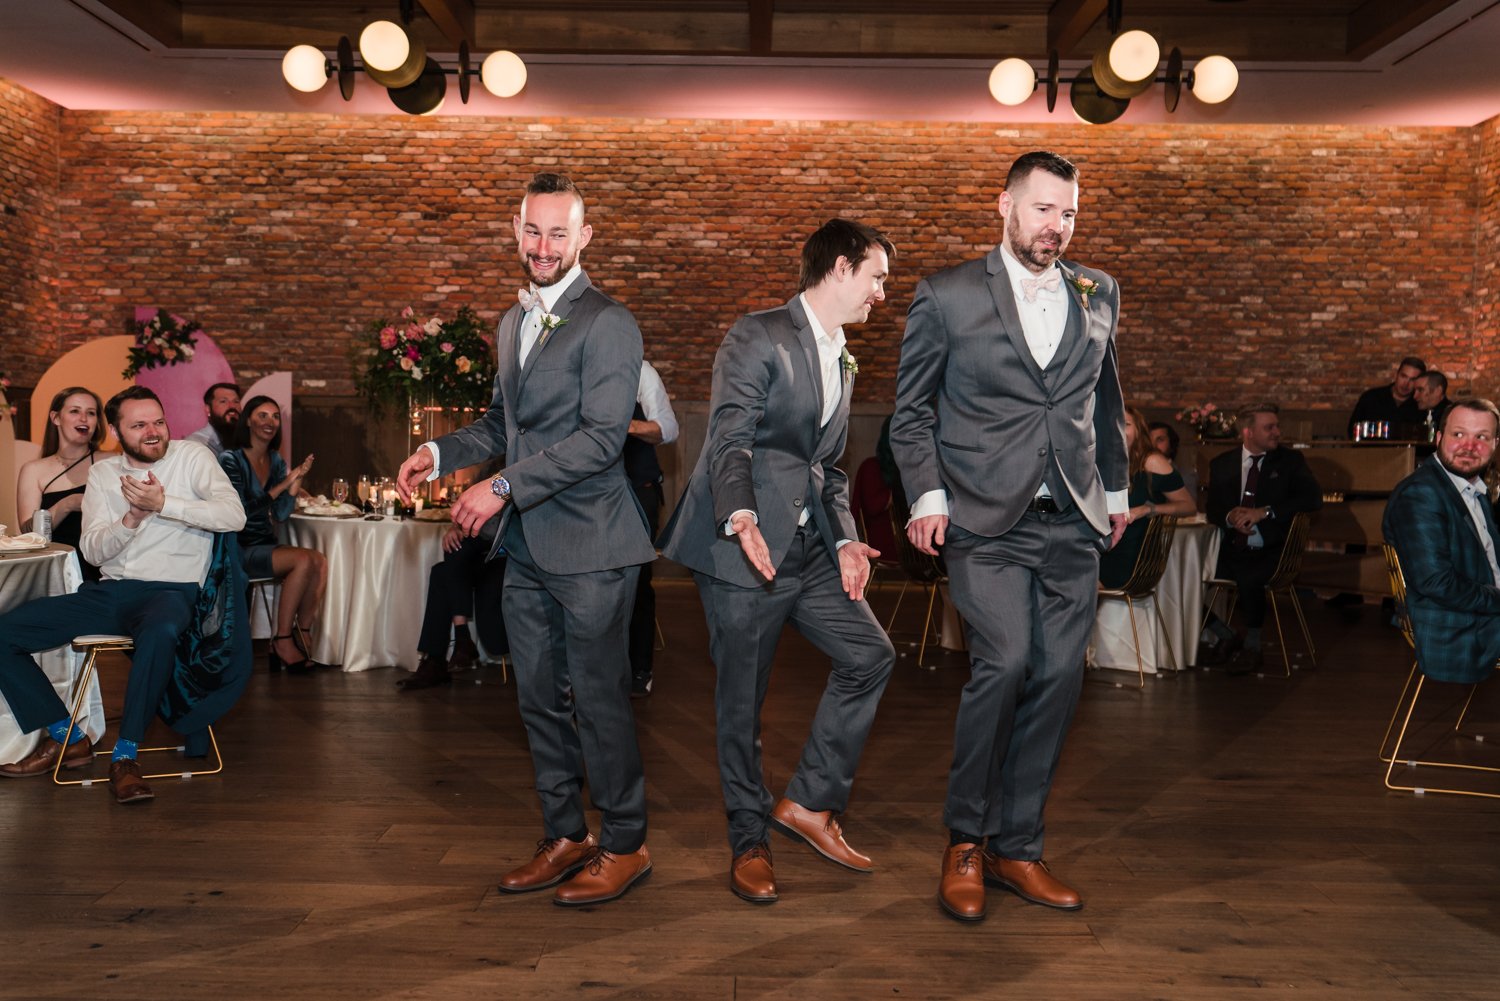  Maven Hotel wedding by Denver photographer JMGant Photography featuring Katie and Sean. 